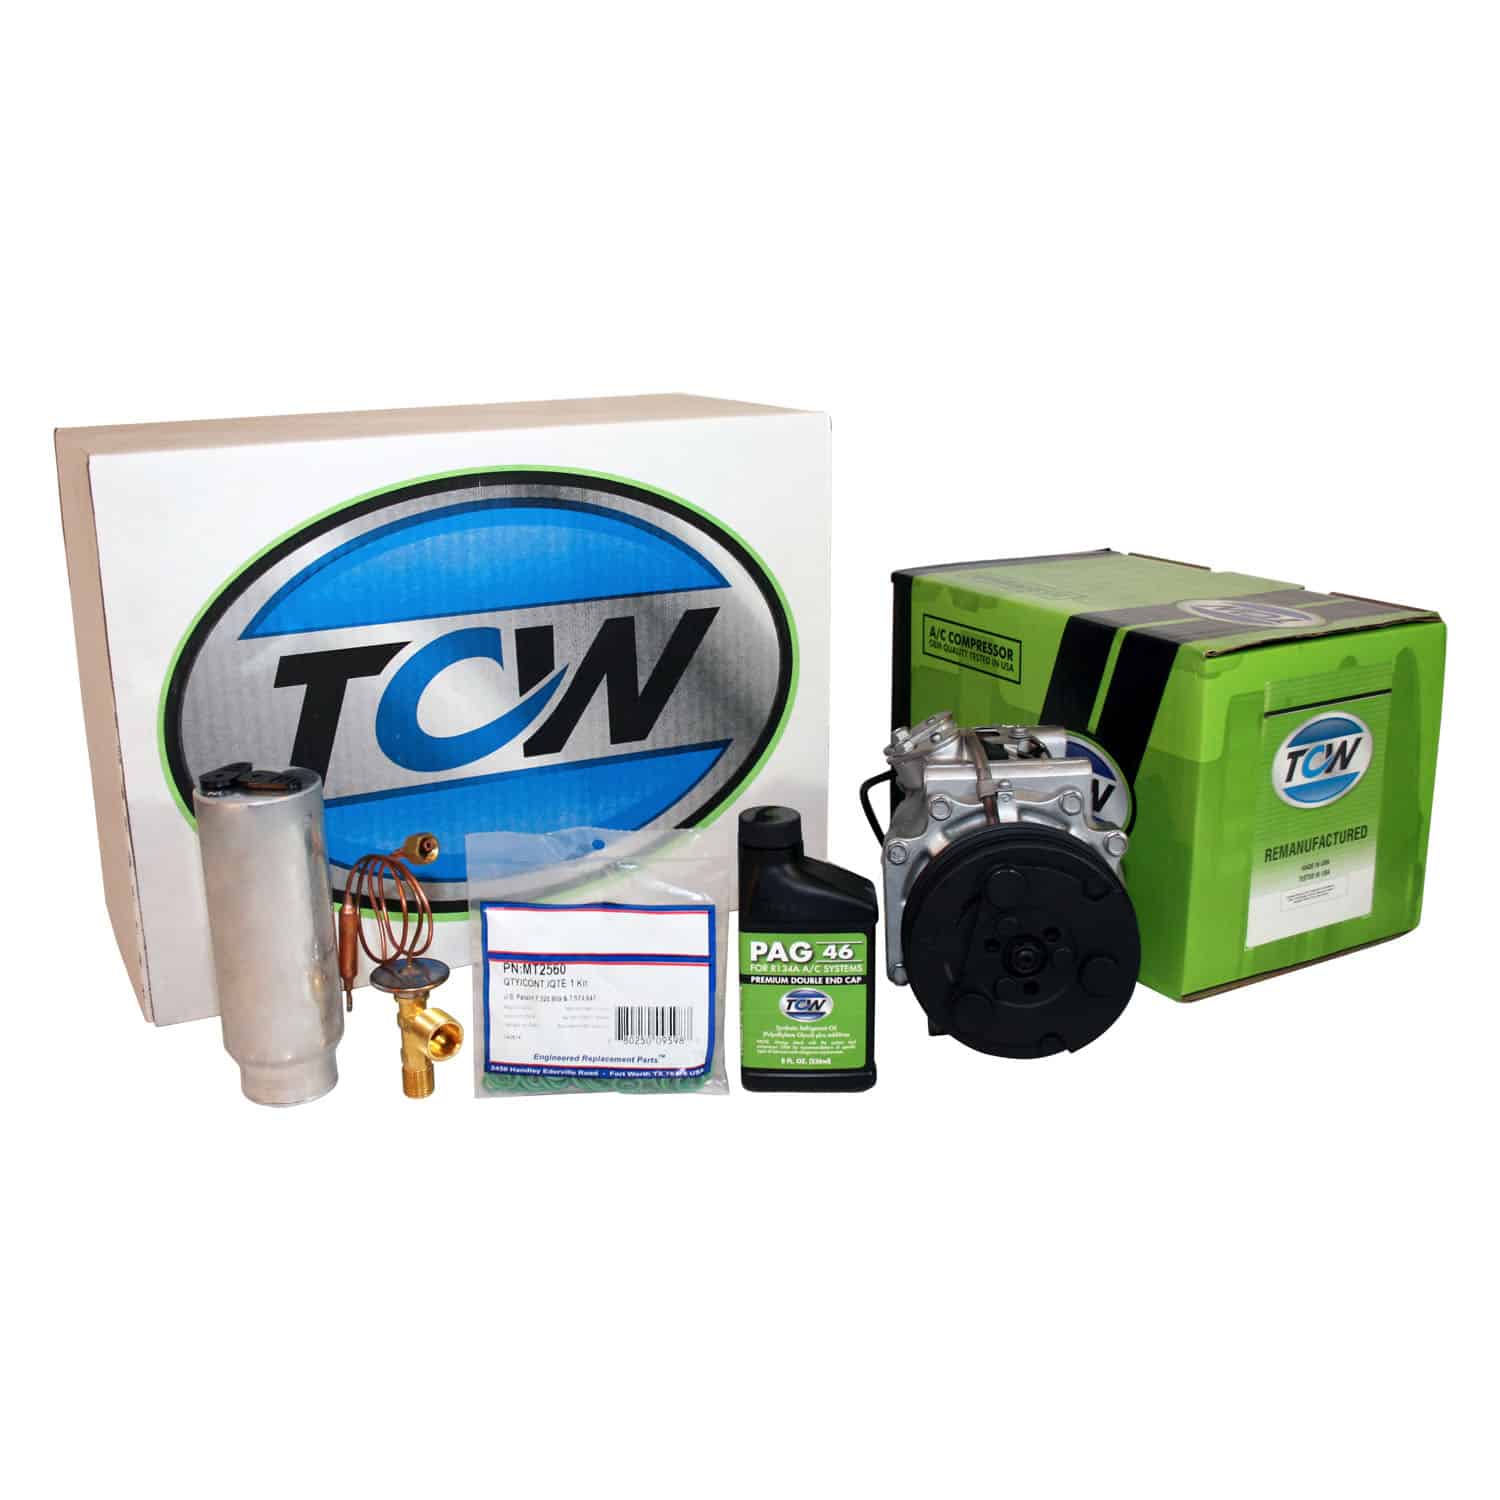 TCW Vehicle A/C Kit K1000304R Remanufactured Product Image field_60b6a13a6e67c